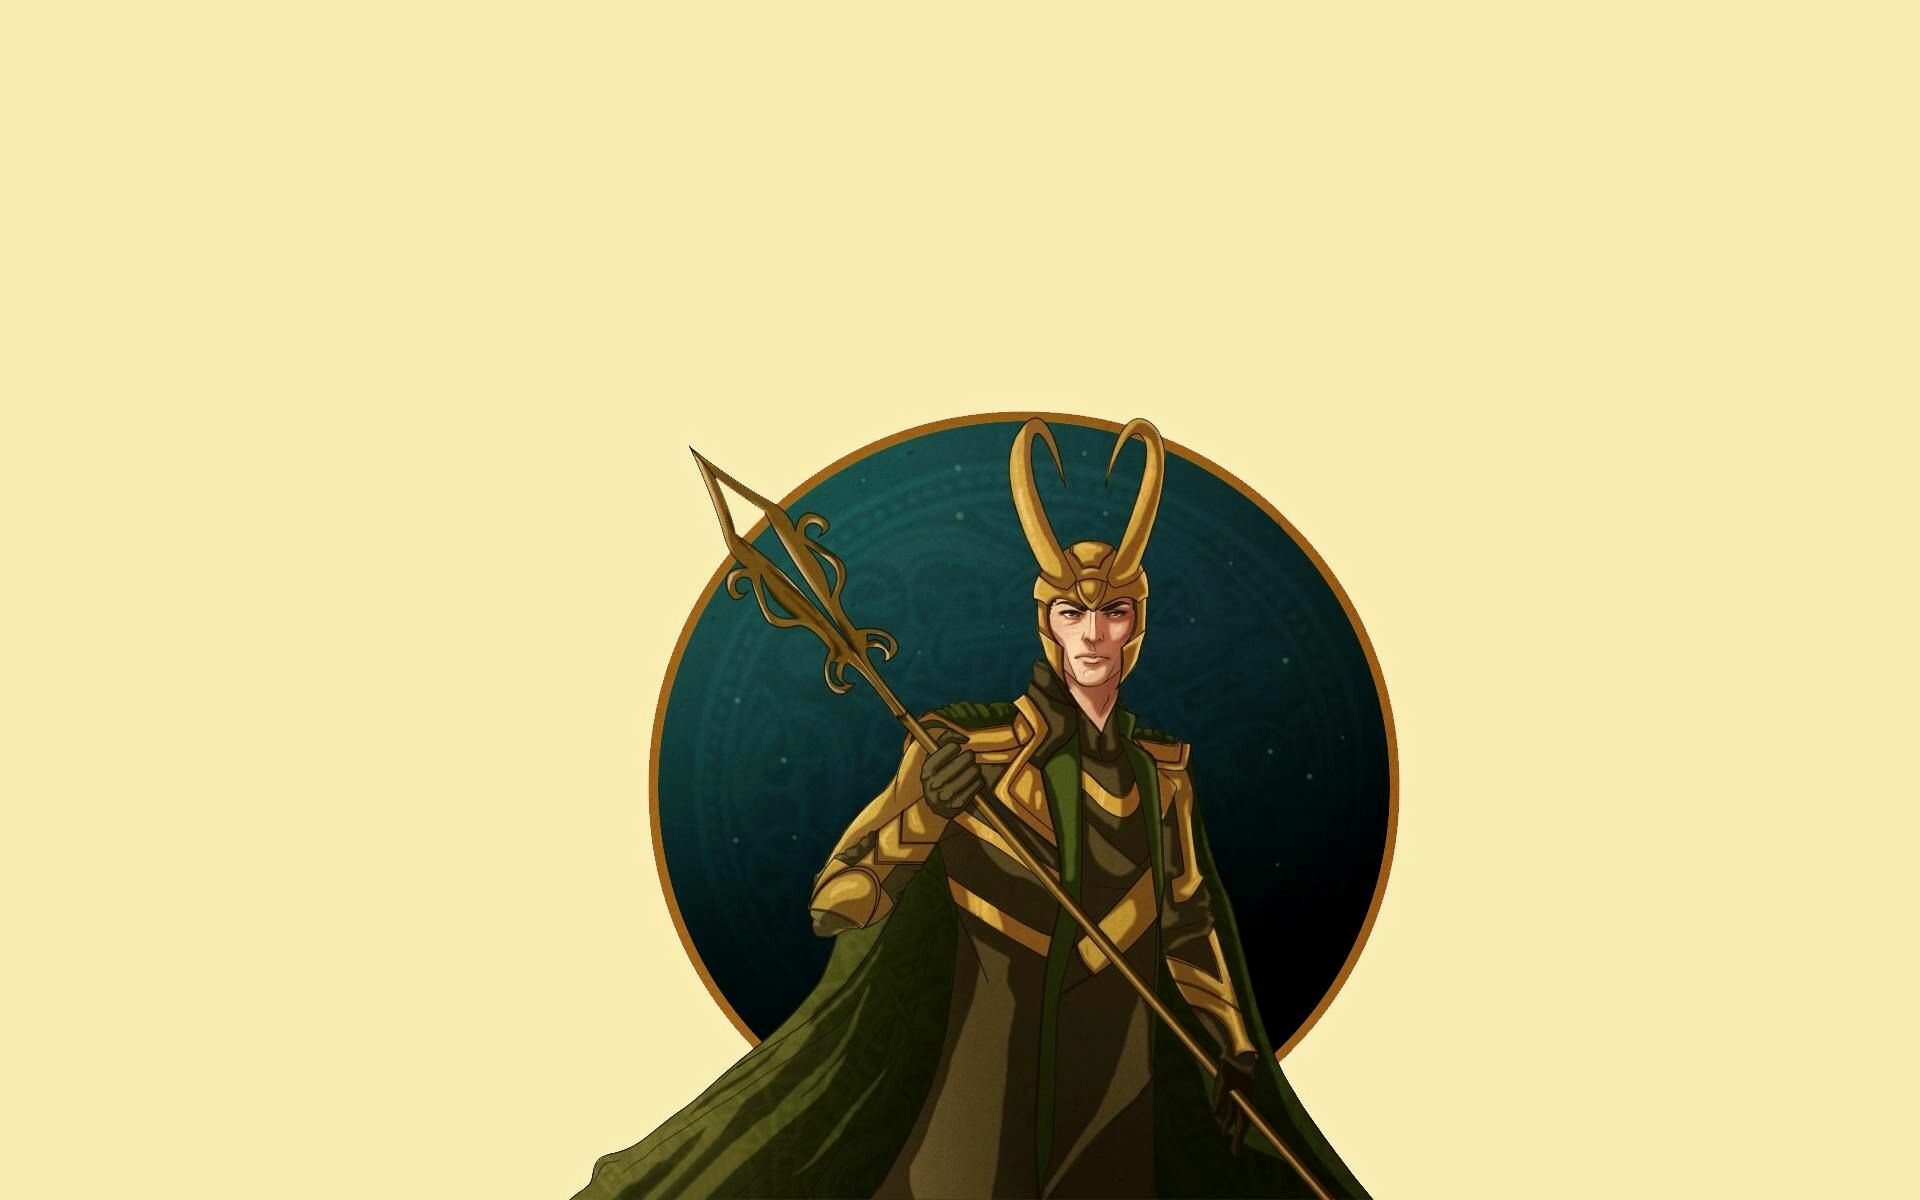 Loki (TV Series): Attacked a remote S.H.I.E.L.D. research facility, using a scepter that controls people's minds, in 2012. 1920x1200 HD Background.